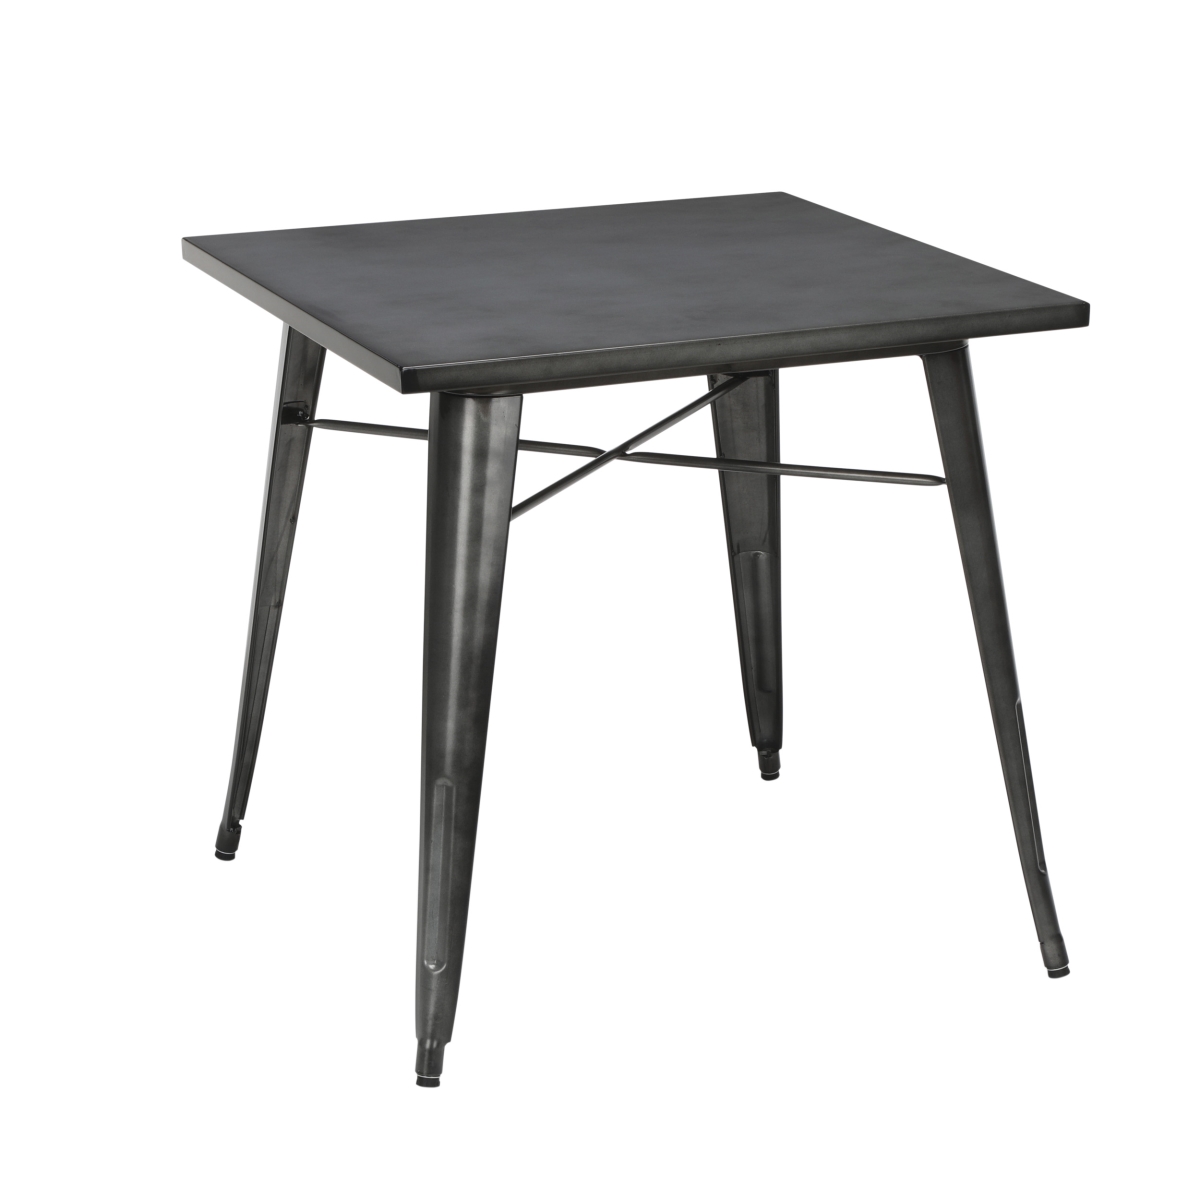 161-t30-gm 30 In. 161 Collection Industrial Modern Square Dining Table, Galvanized Steel Indoor & Outdoor Table - Gunmetal